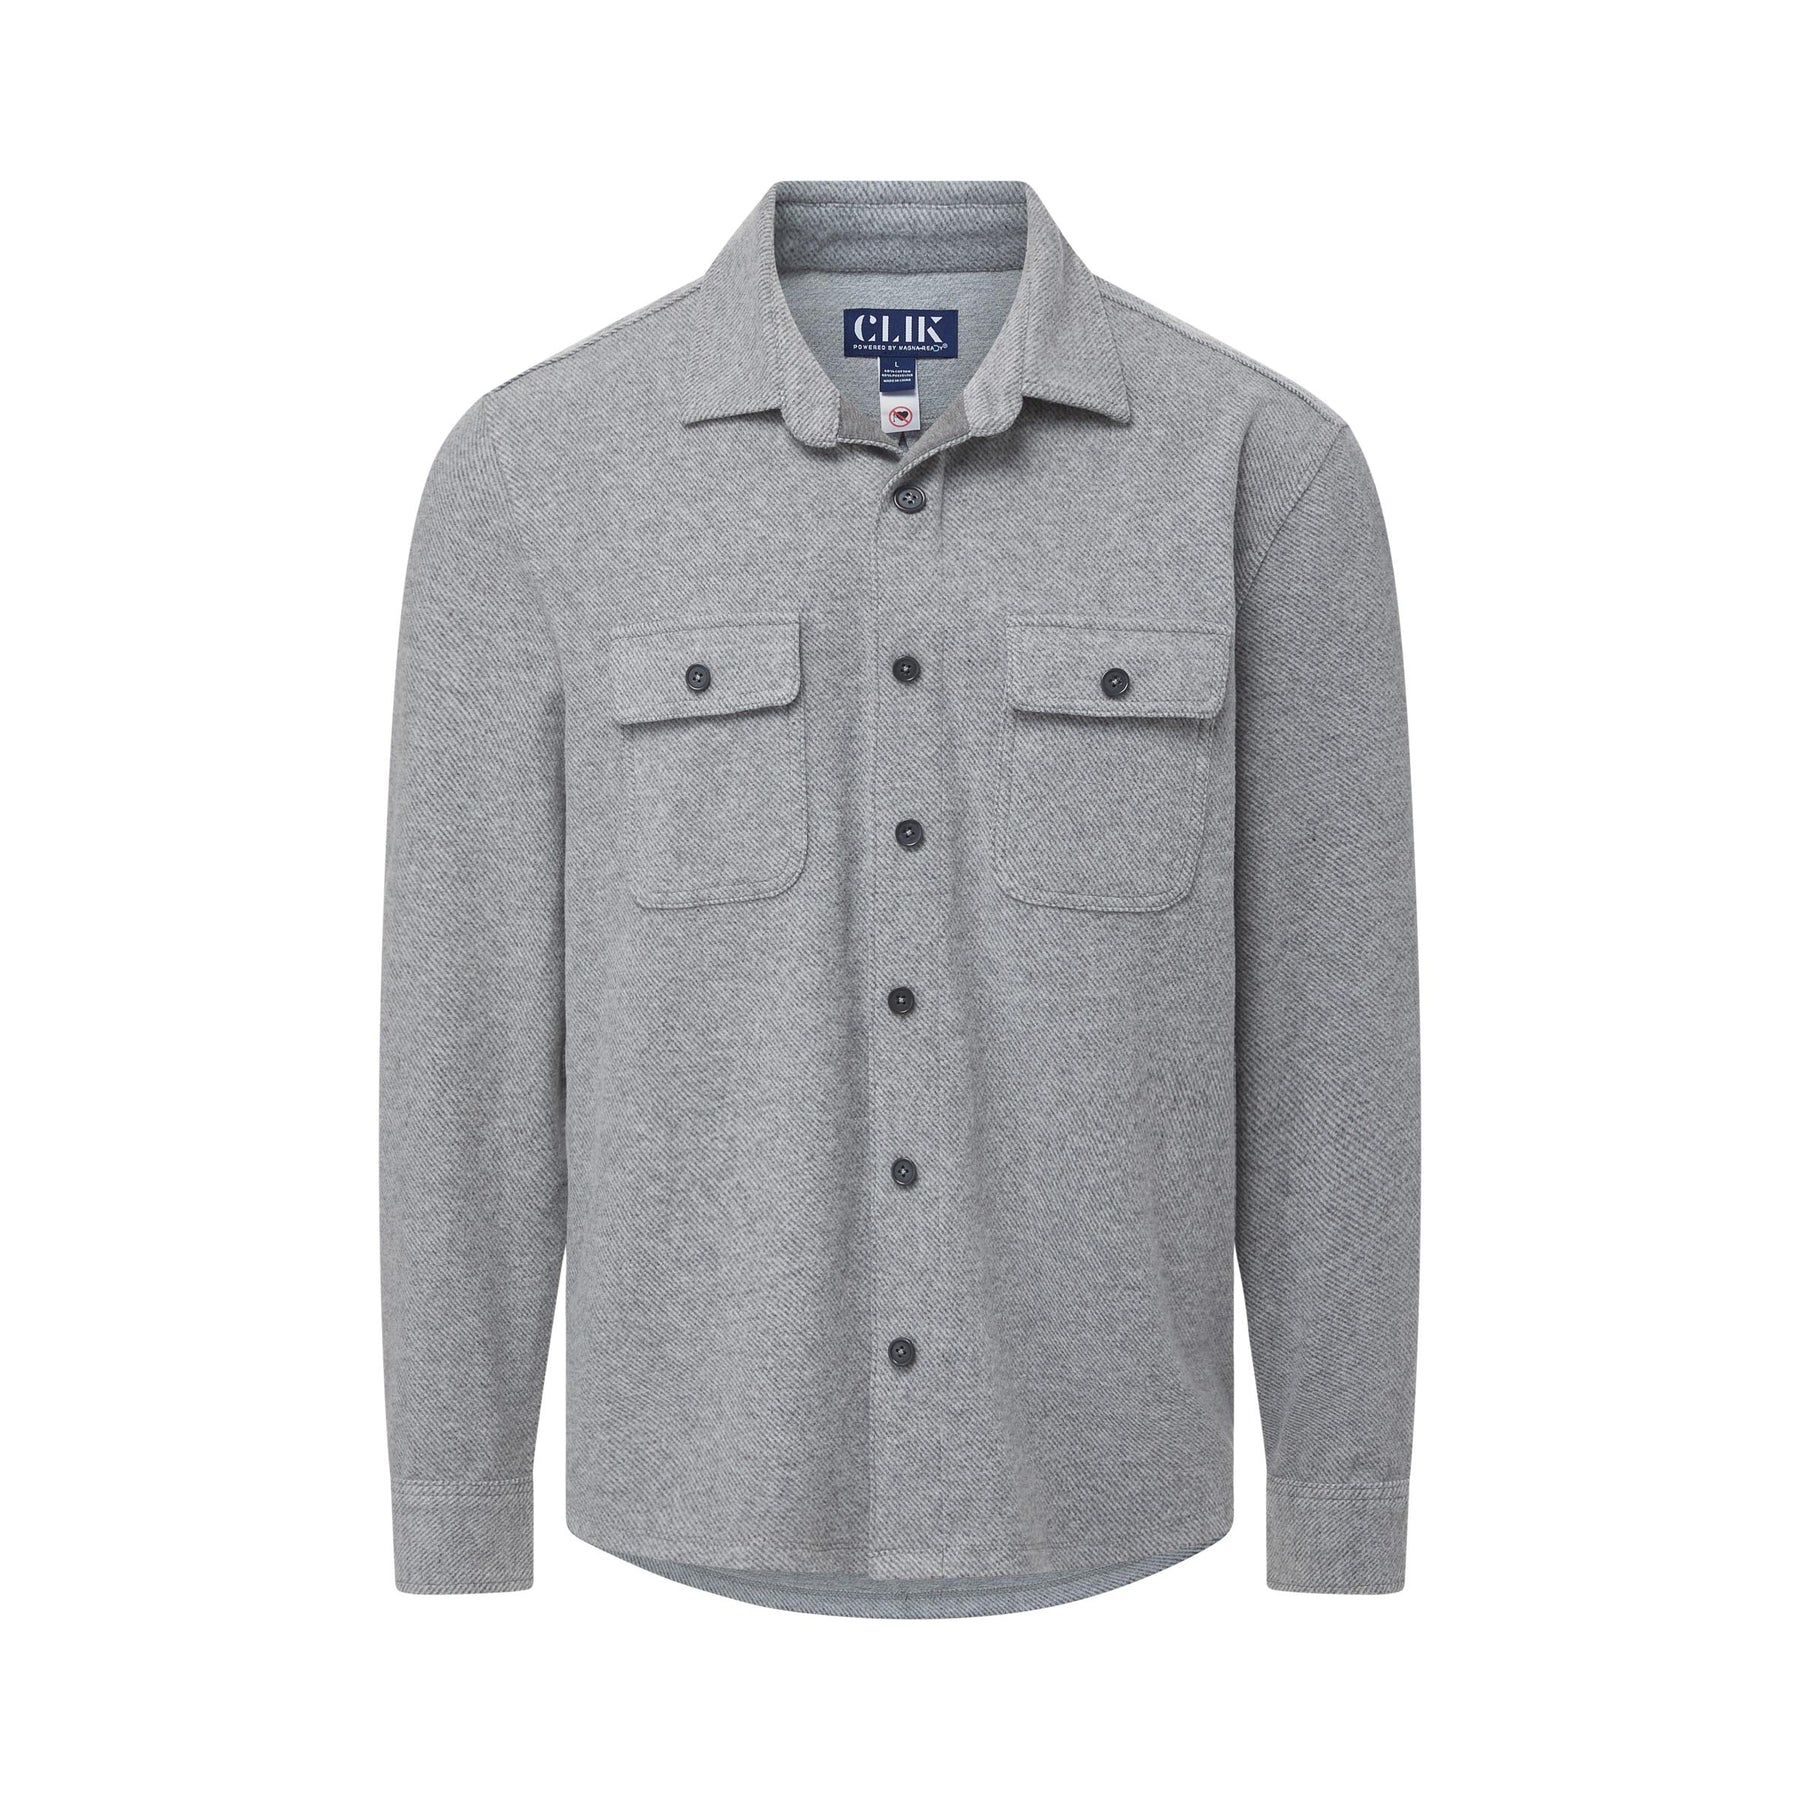 Long Sleeve Light Heather Grey Flannel Shirt Combo Layering Piece with Magnetic Closures